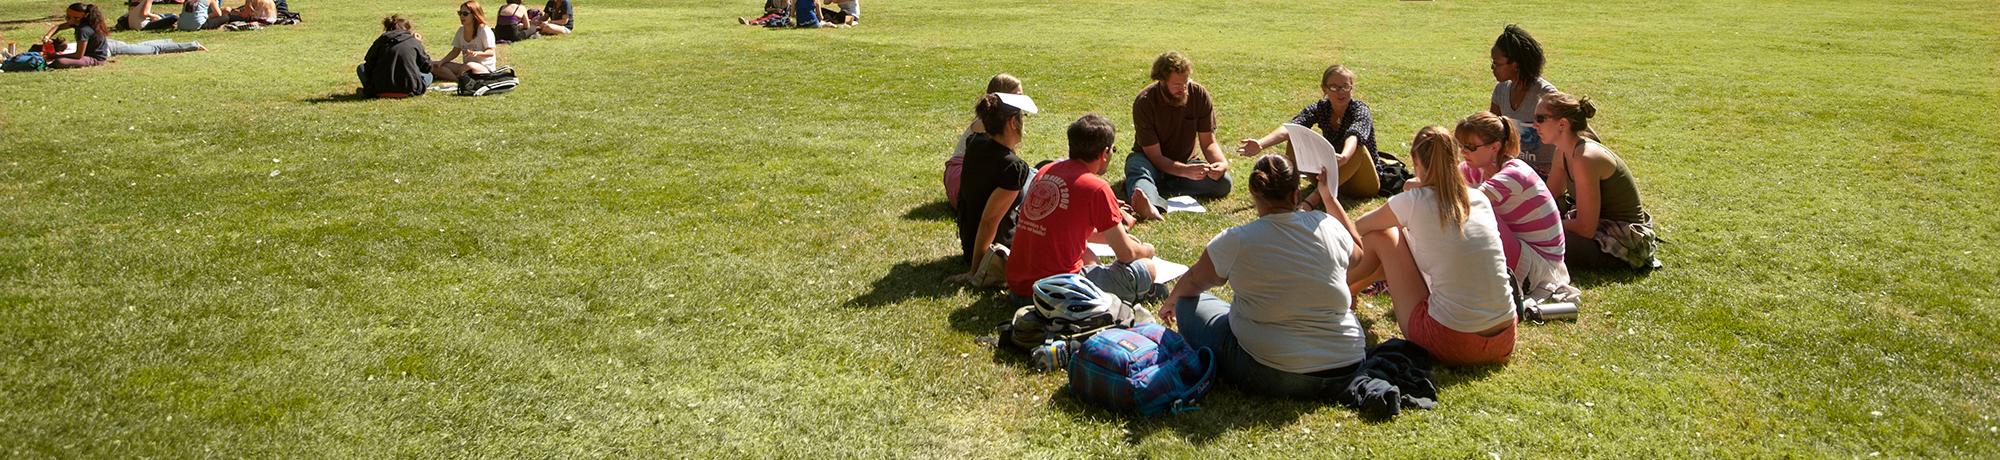 teenagers studying in a group in a park